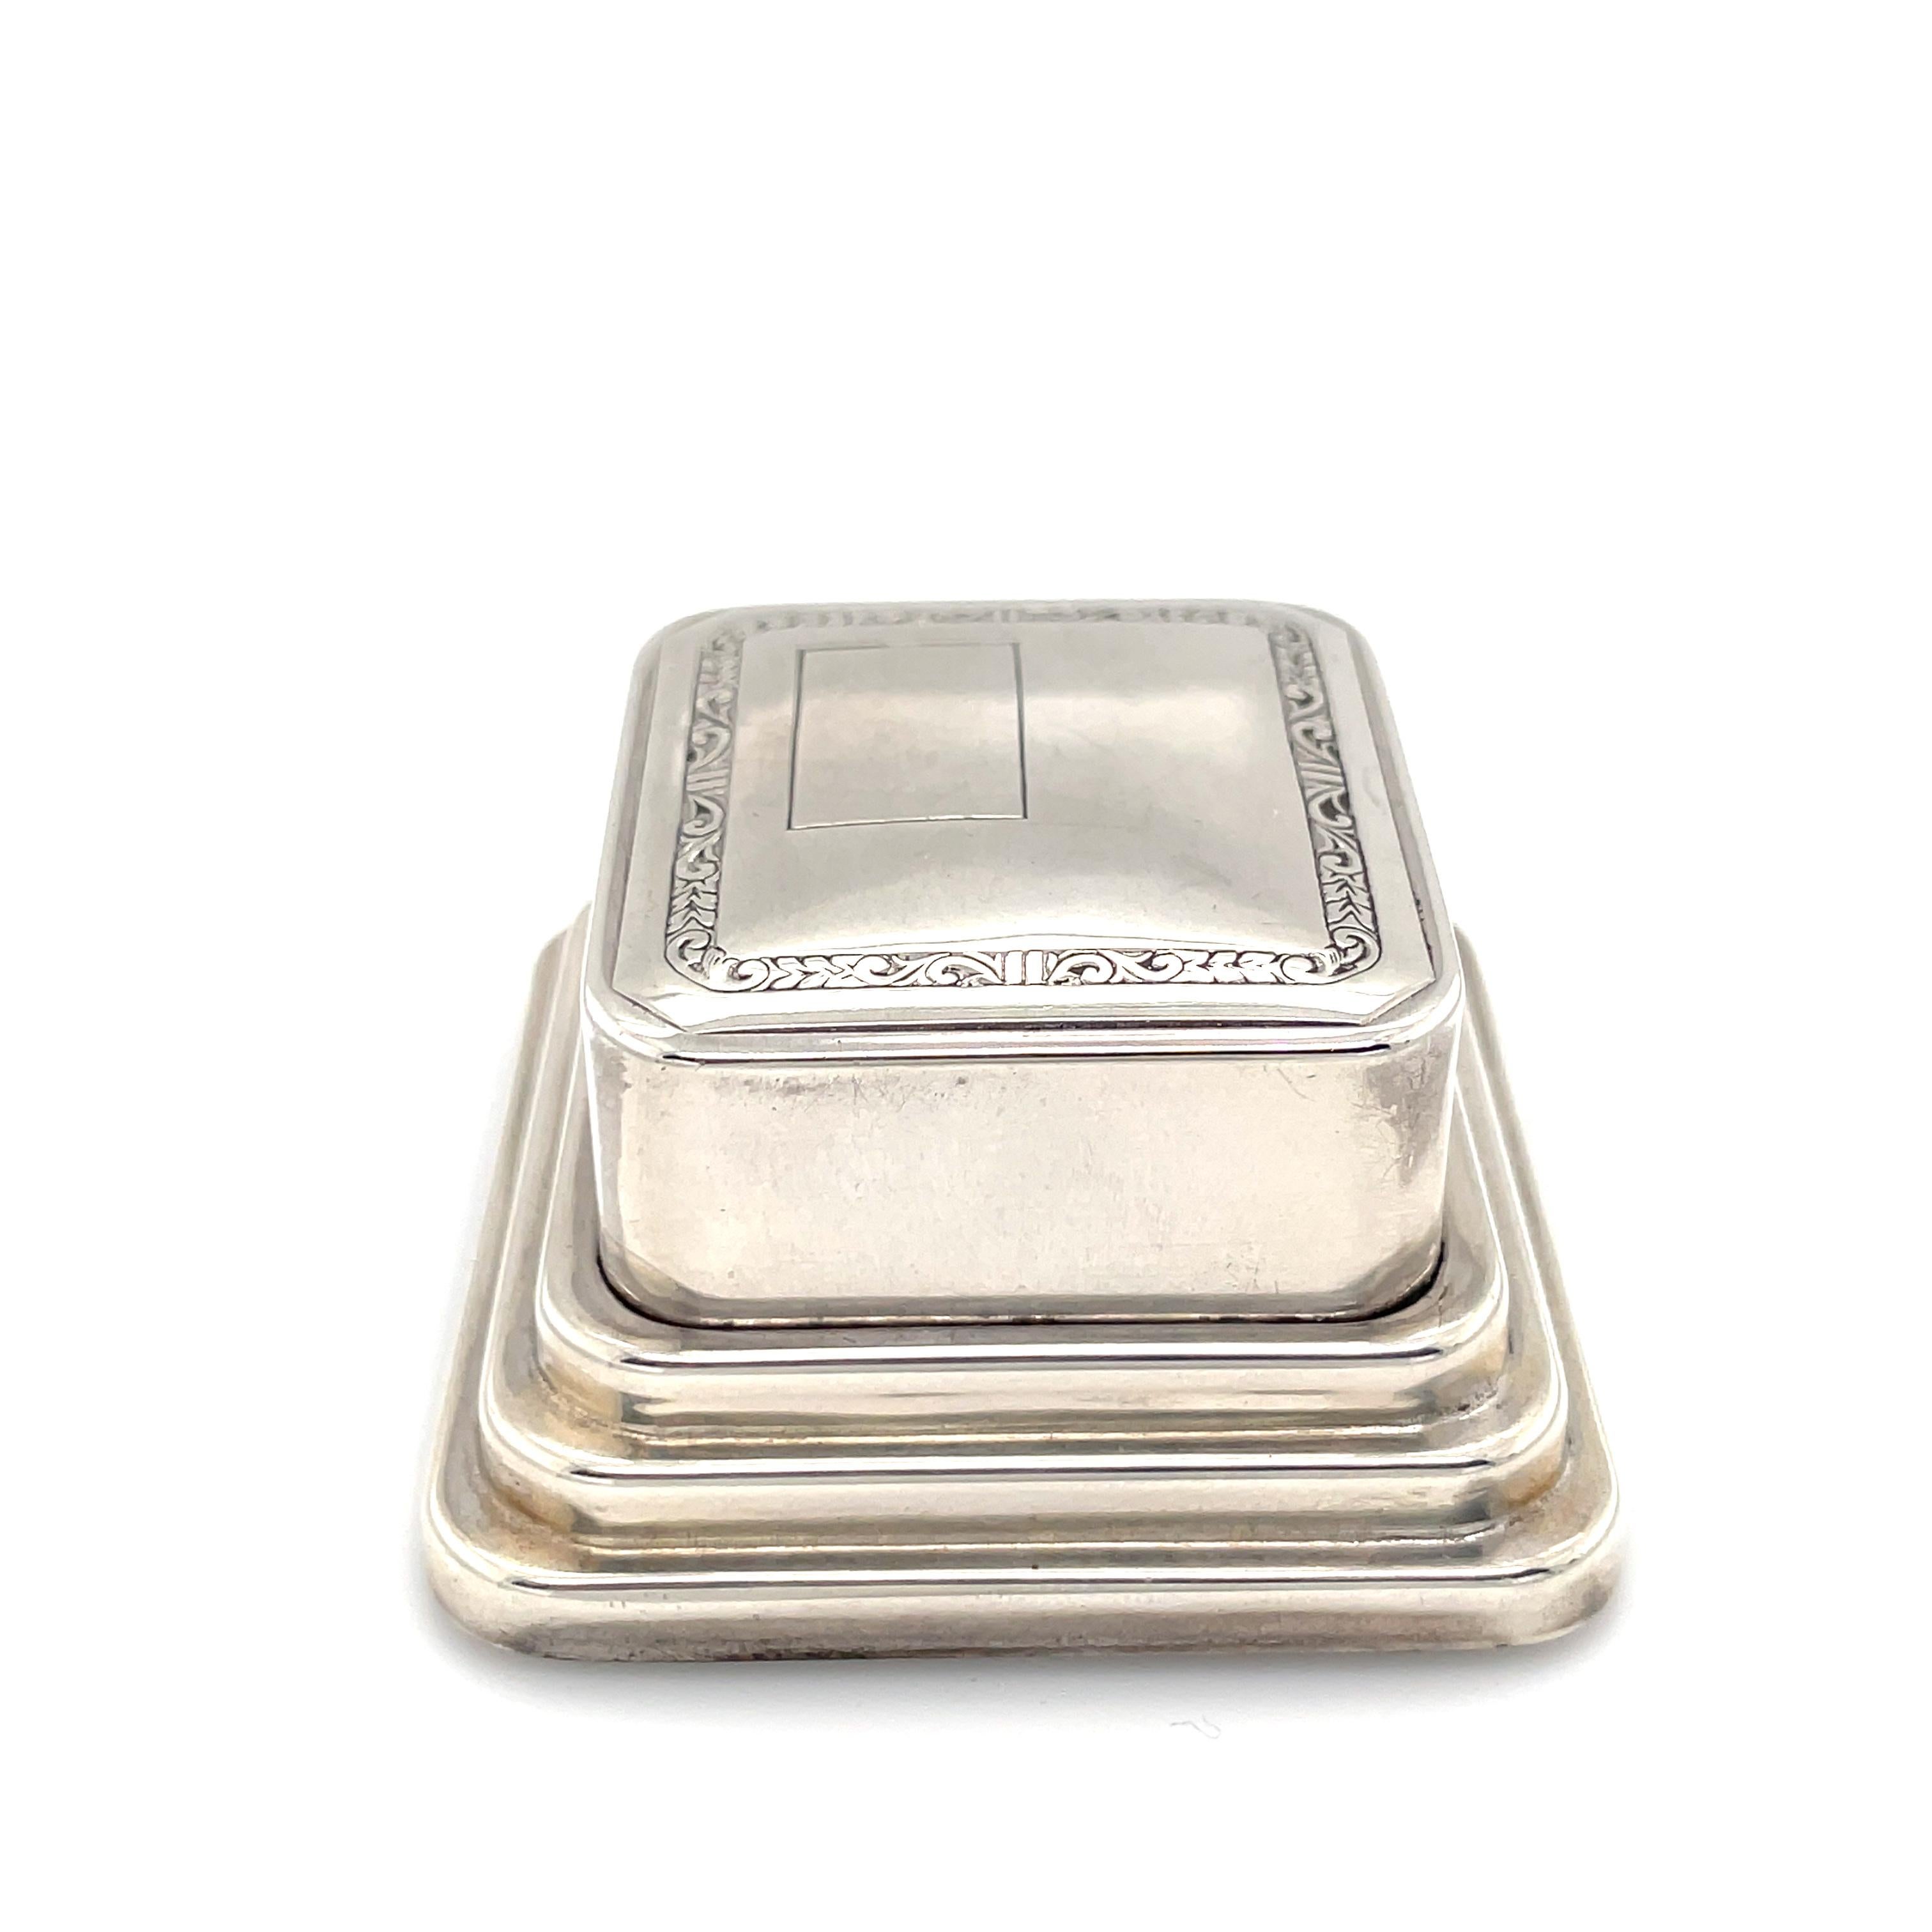 Antique sterling silver hinged ring box.  Distinctively set on three graduated sterling pedestals.  There is an engraved border on the top, along with a reserve for hand engraving a monogram.  Overall size is 2